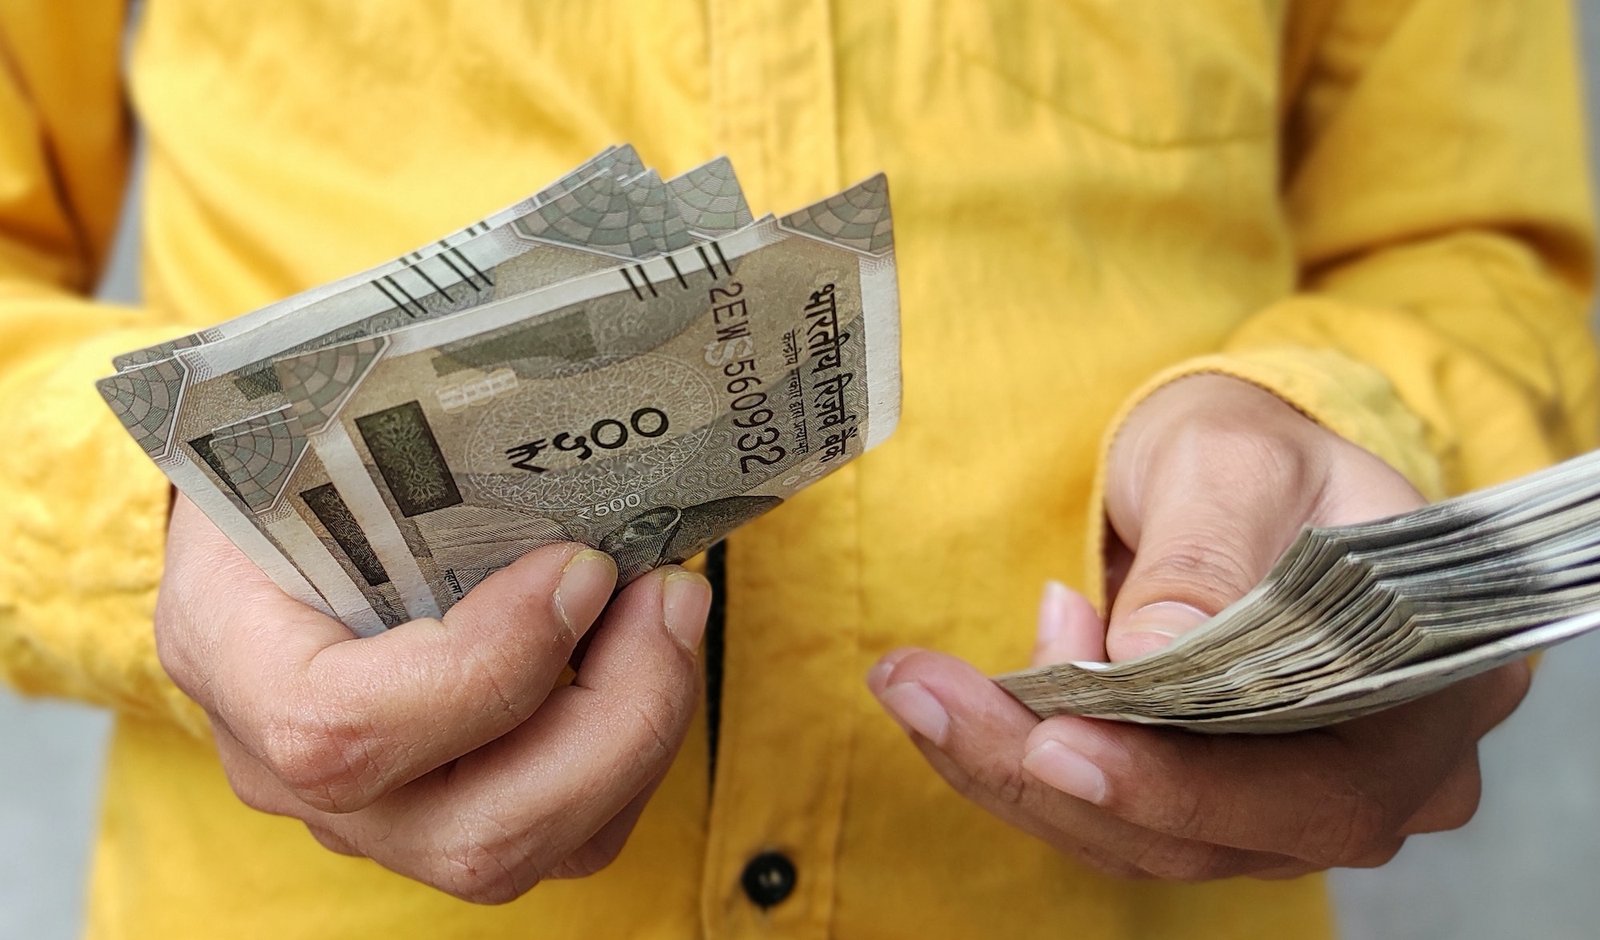 Holding money in hand, counting Indian currency 500 rupee note in hand, business , financial